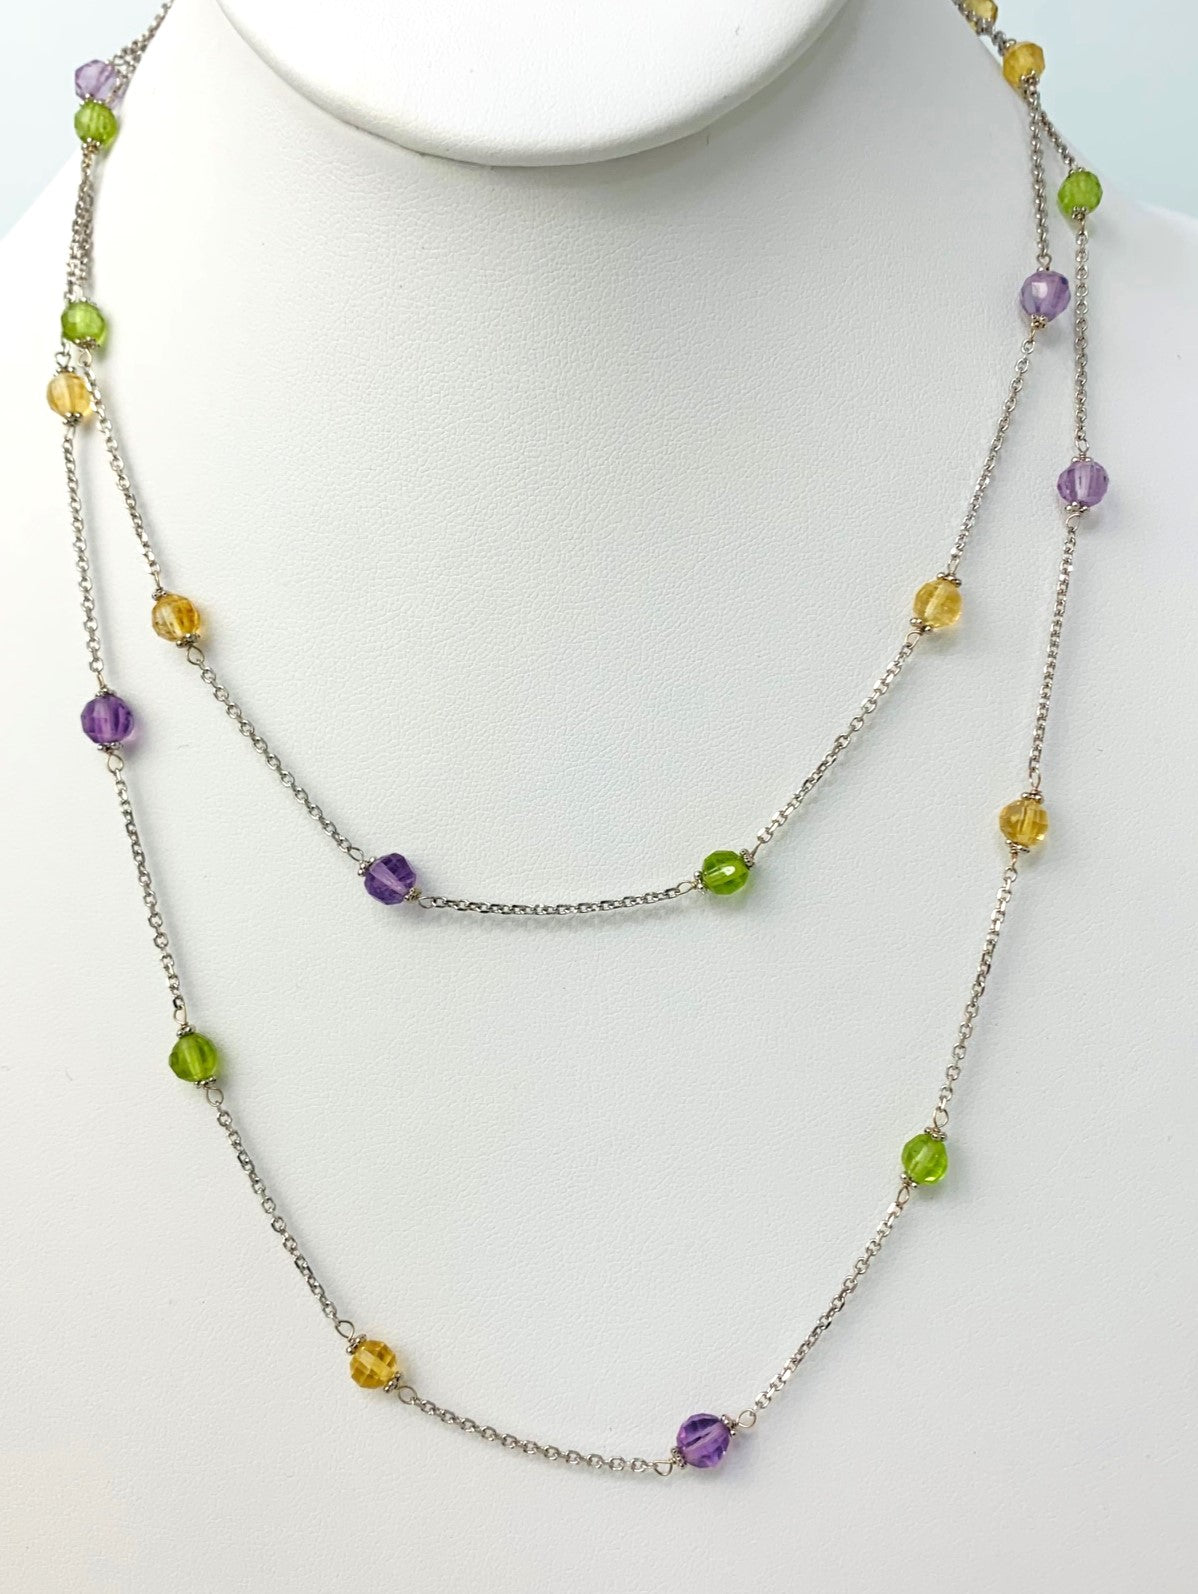 36" Citrine, Peridot, And Amethyst Station Necklace in 14KW - NCK-239-TNCGM14W-MLTI-36